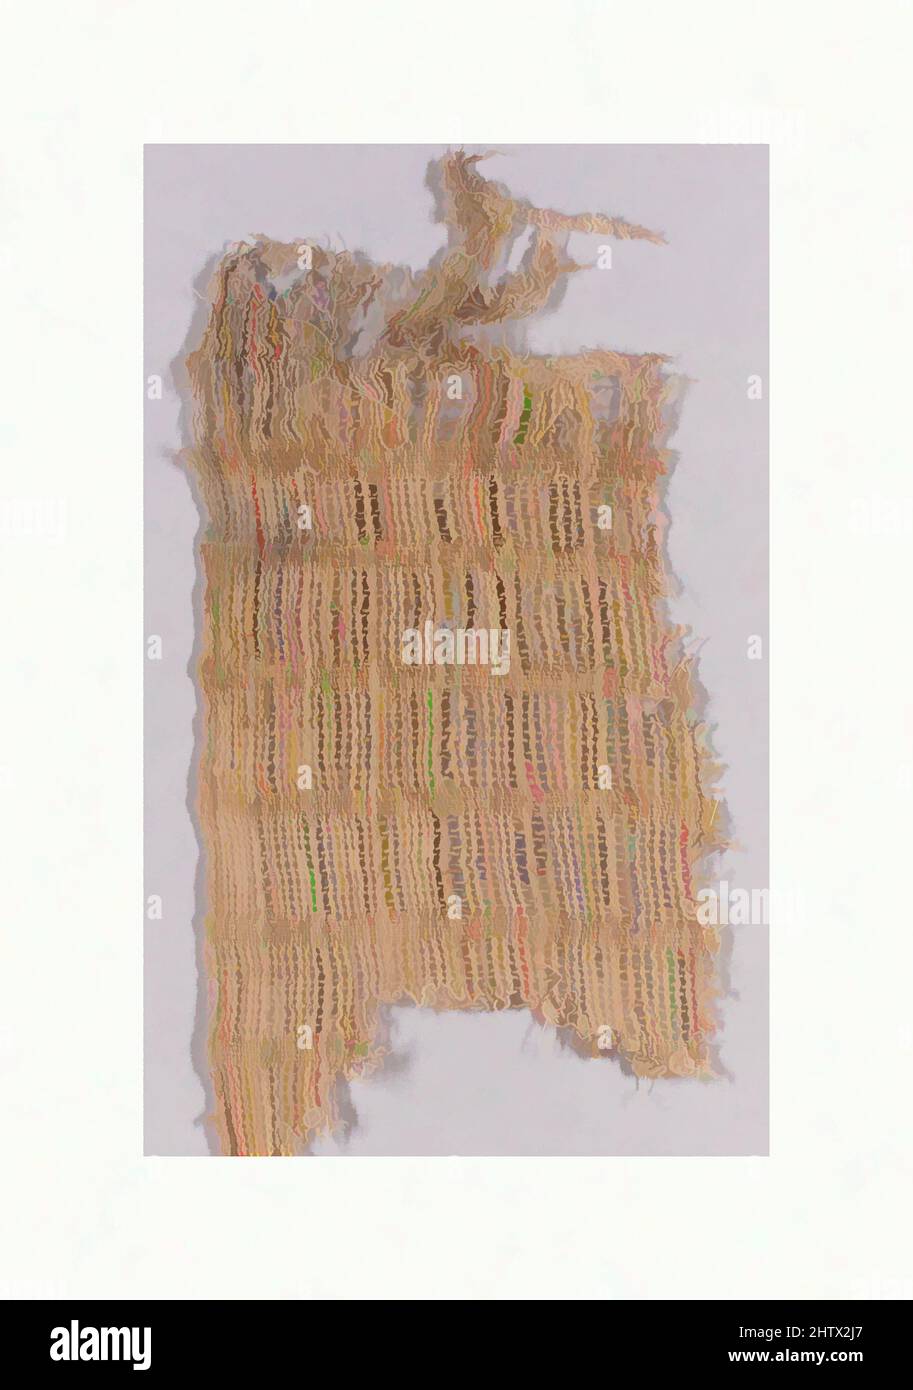 Art inspired by Gauze Fragment, 10th–15th century, Peru, Peru; central coast (?), Cotton gauze, Overall: 6 1/2 x 5 1/4 in. (16.51 x 13.34 cm), Textiles-Woven, Classic works modernized by Artotop with a splash of modernity. Shapes, color and value, eye-catching visual impact on art. Emotions through freedom of artworks in a contemporary way. A timeless message pursuing a wildly creative new direction. Artists turning to the digital medium and creating the Artotop NFT Stock Photo